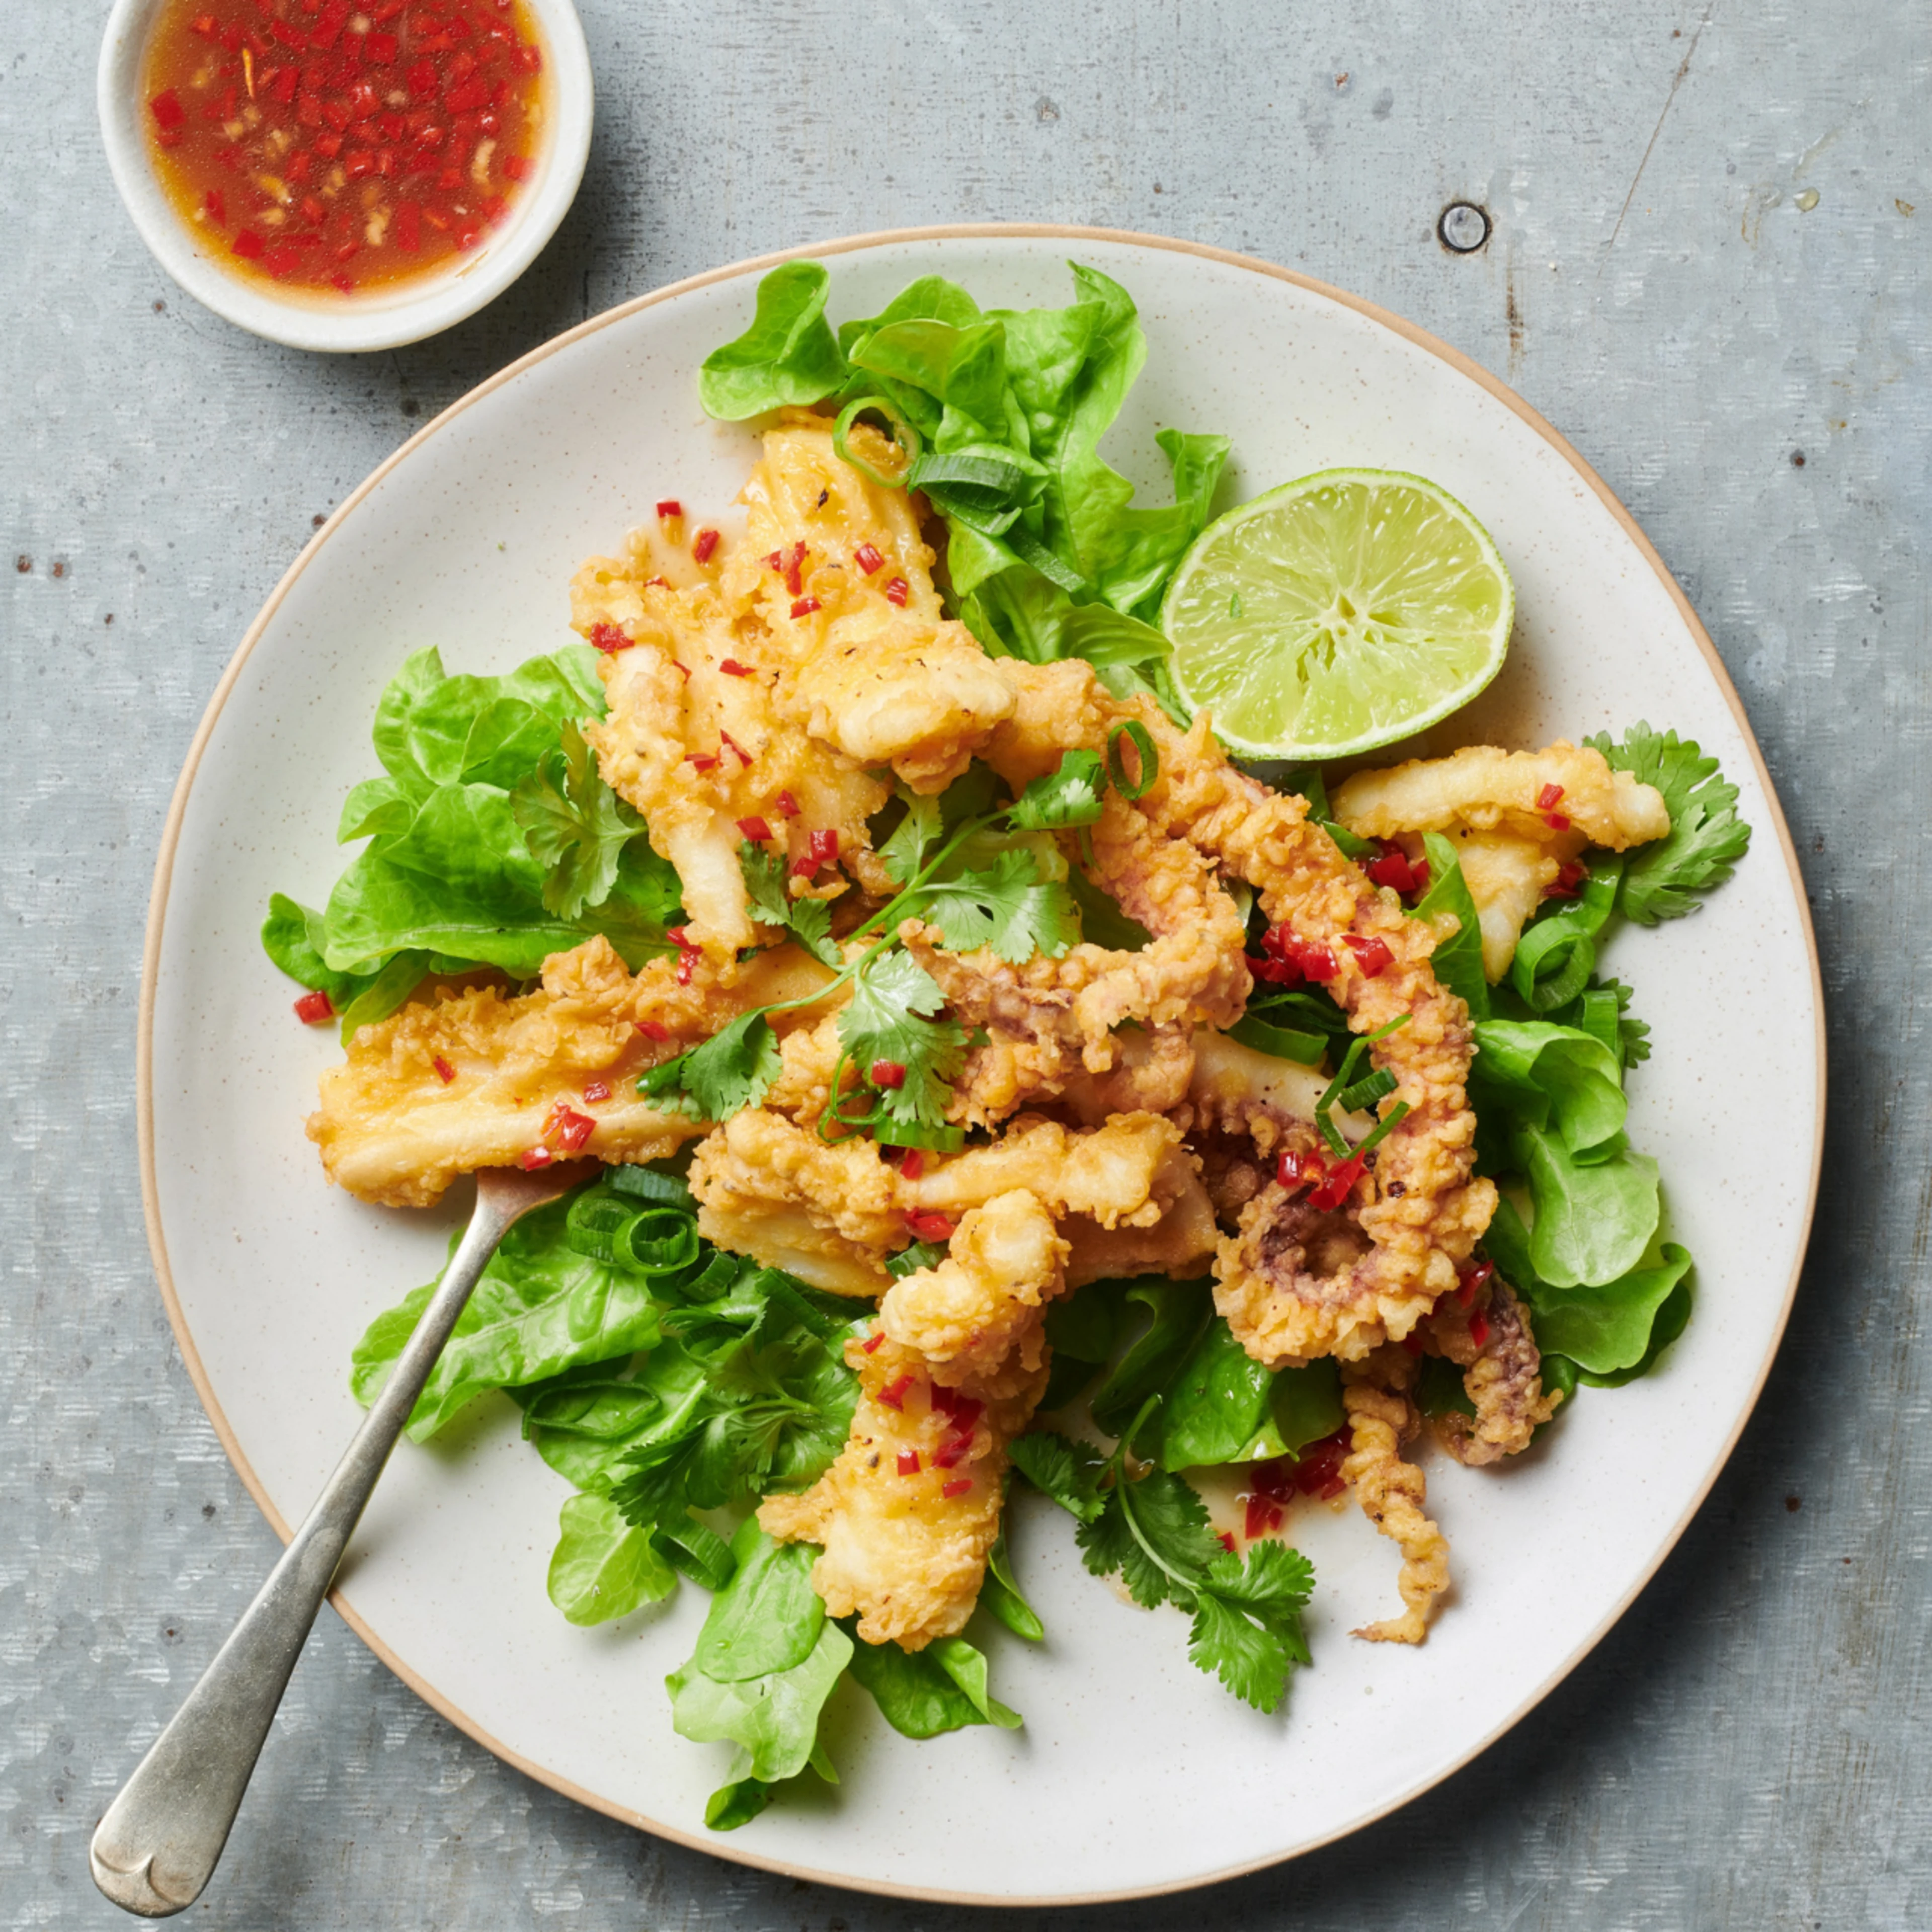 Crispy squid calamari salad with lime, chilli and honey dressing recipe. An easy meal for lunch or dinner.